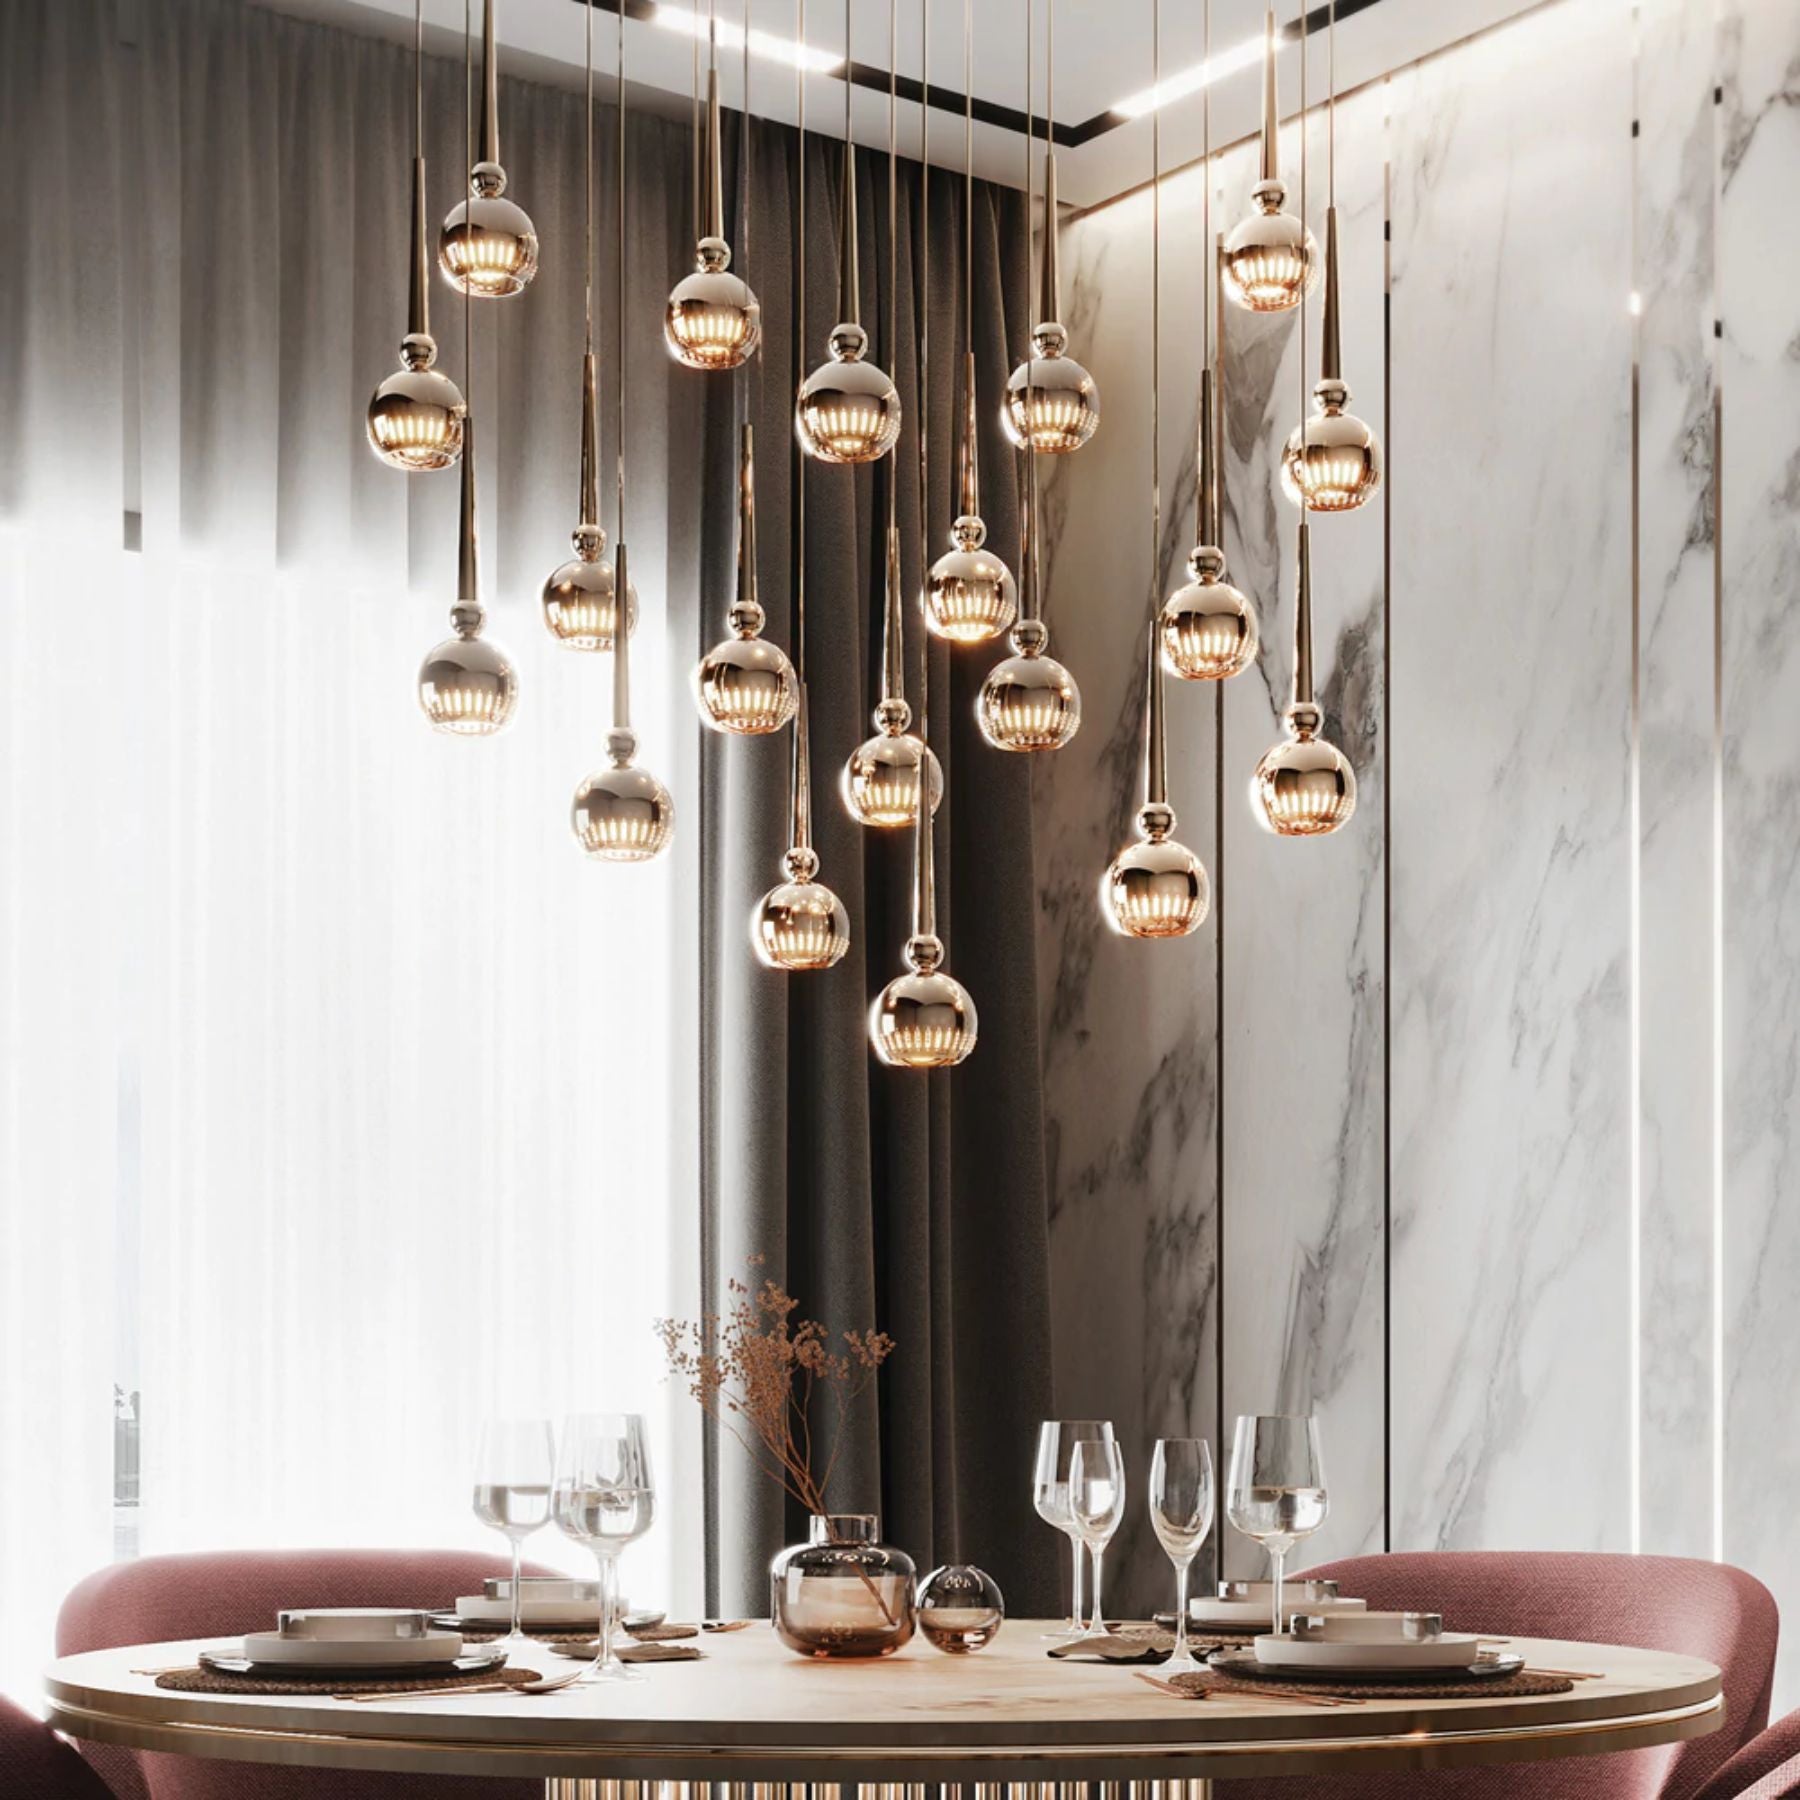 the raindrop crystal pendant lamp represents exquisite grace and outstanding decoration